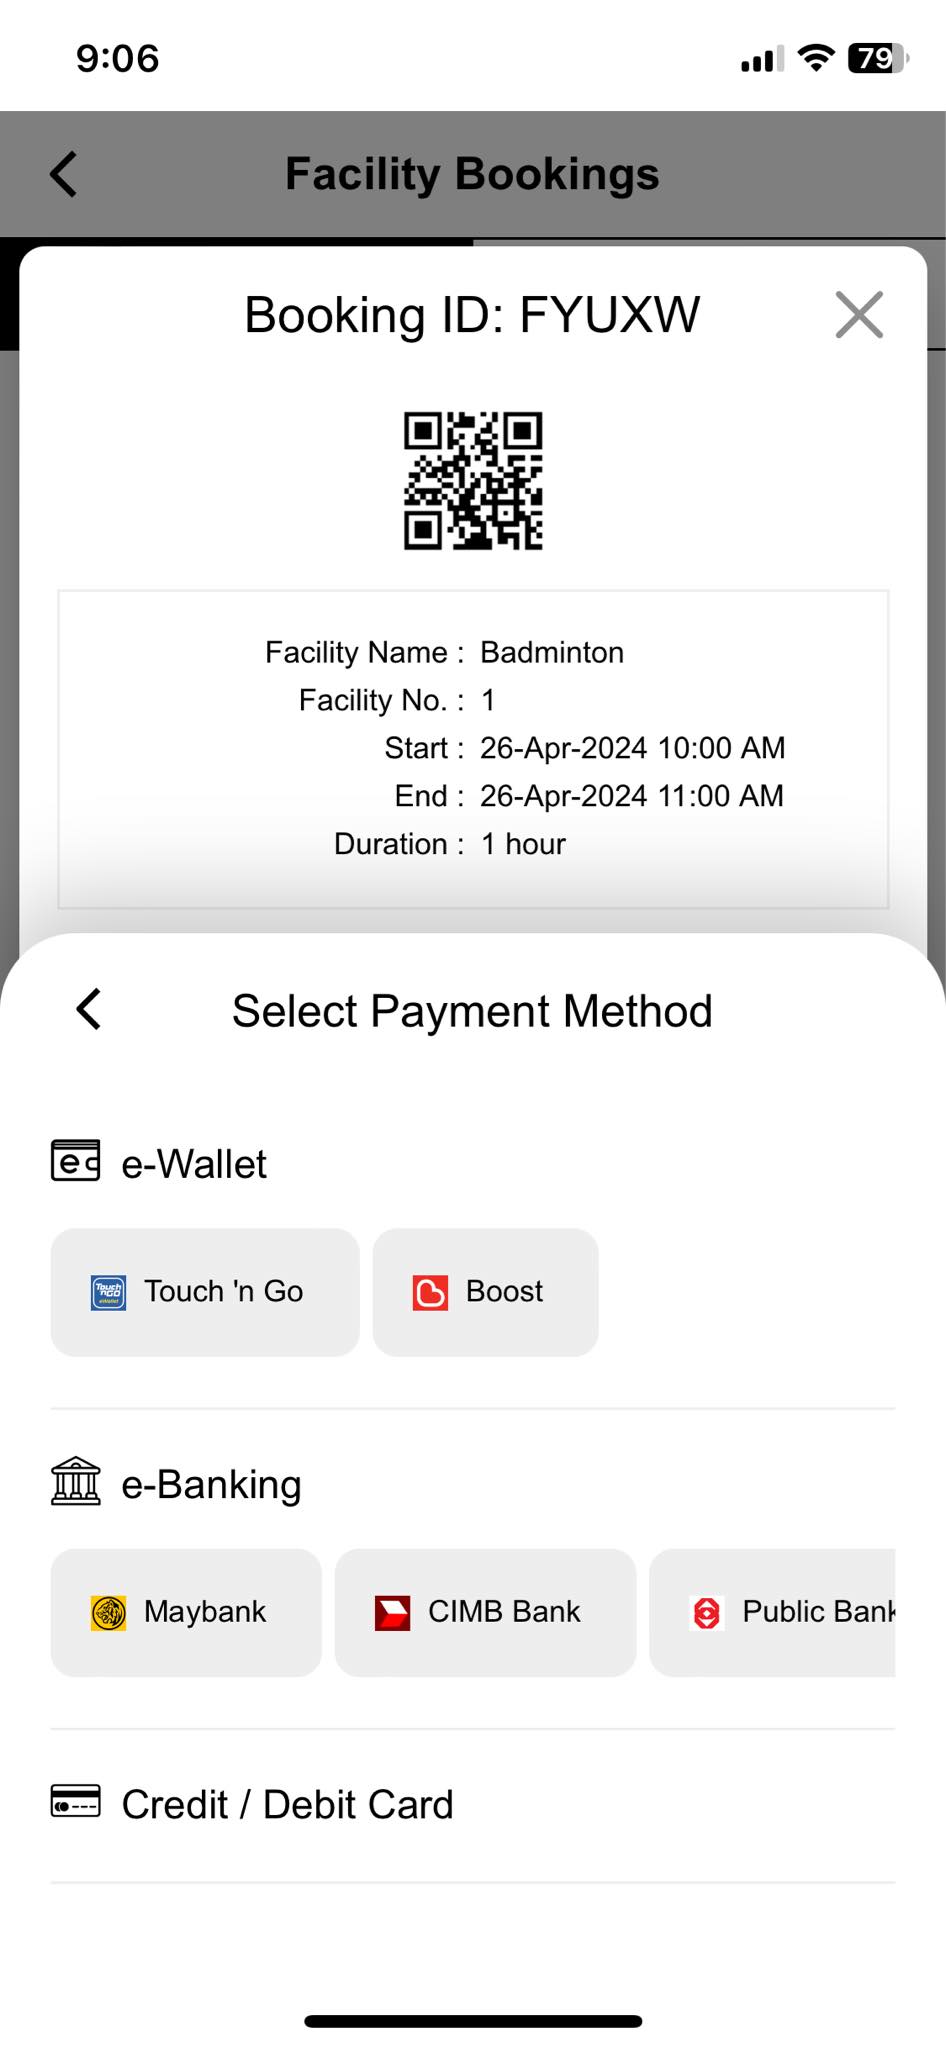 Facility Bookings App - Make Payment Online